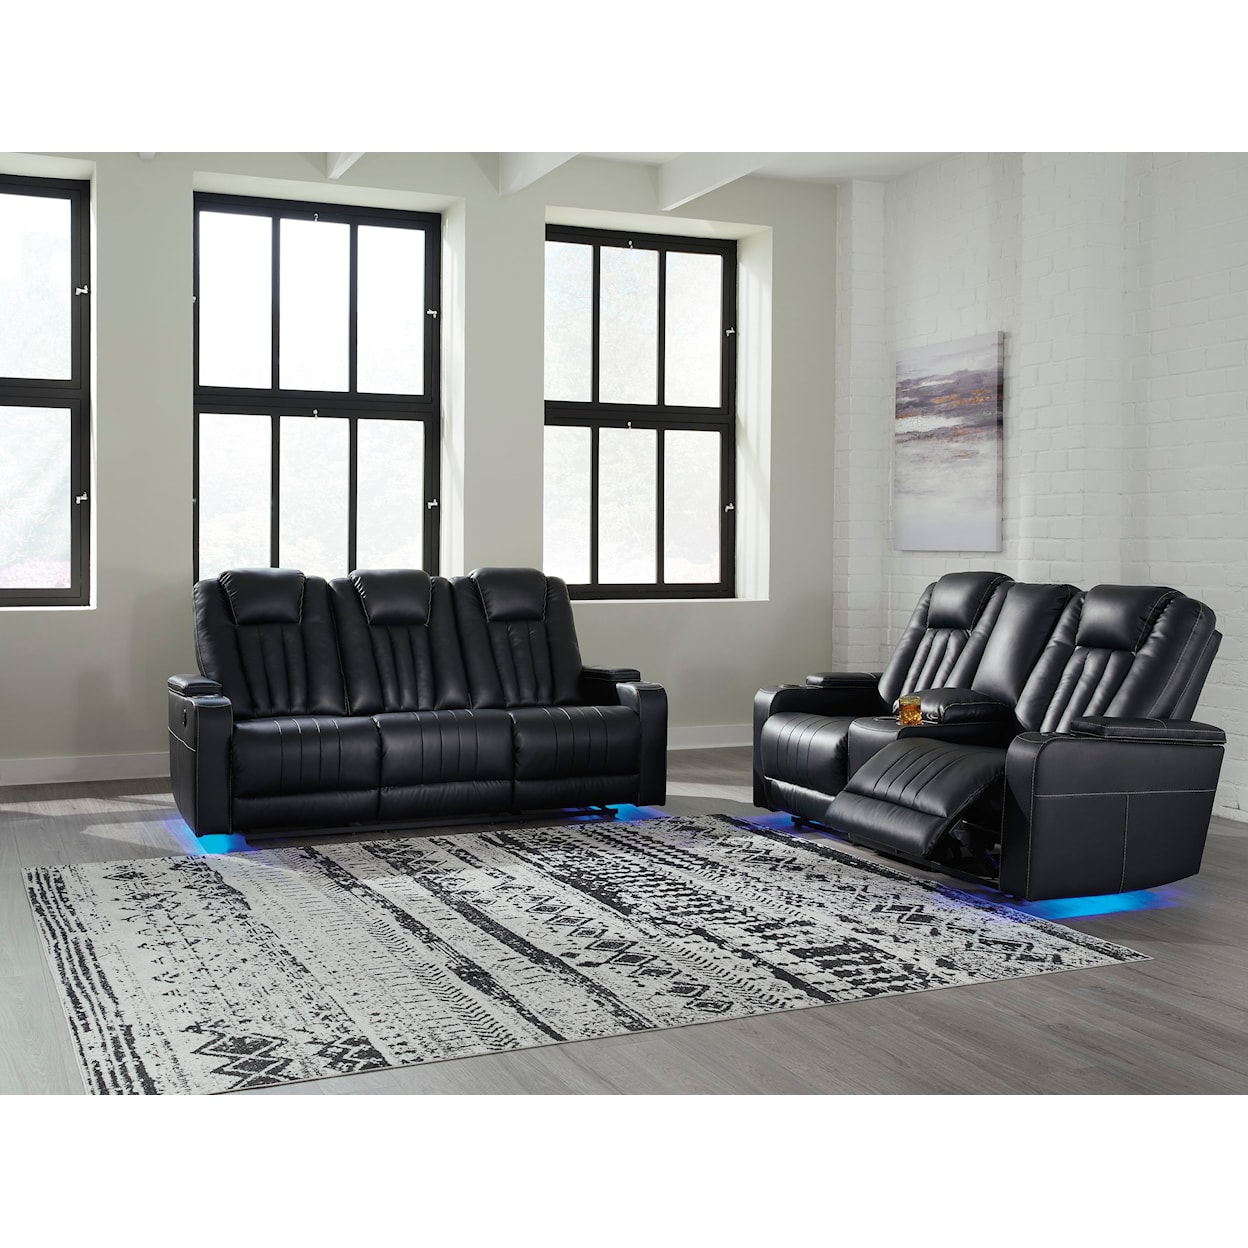 Signature Design by Ashley Center Point Living Room Set